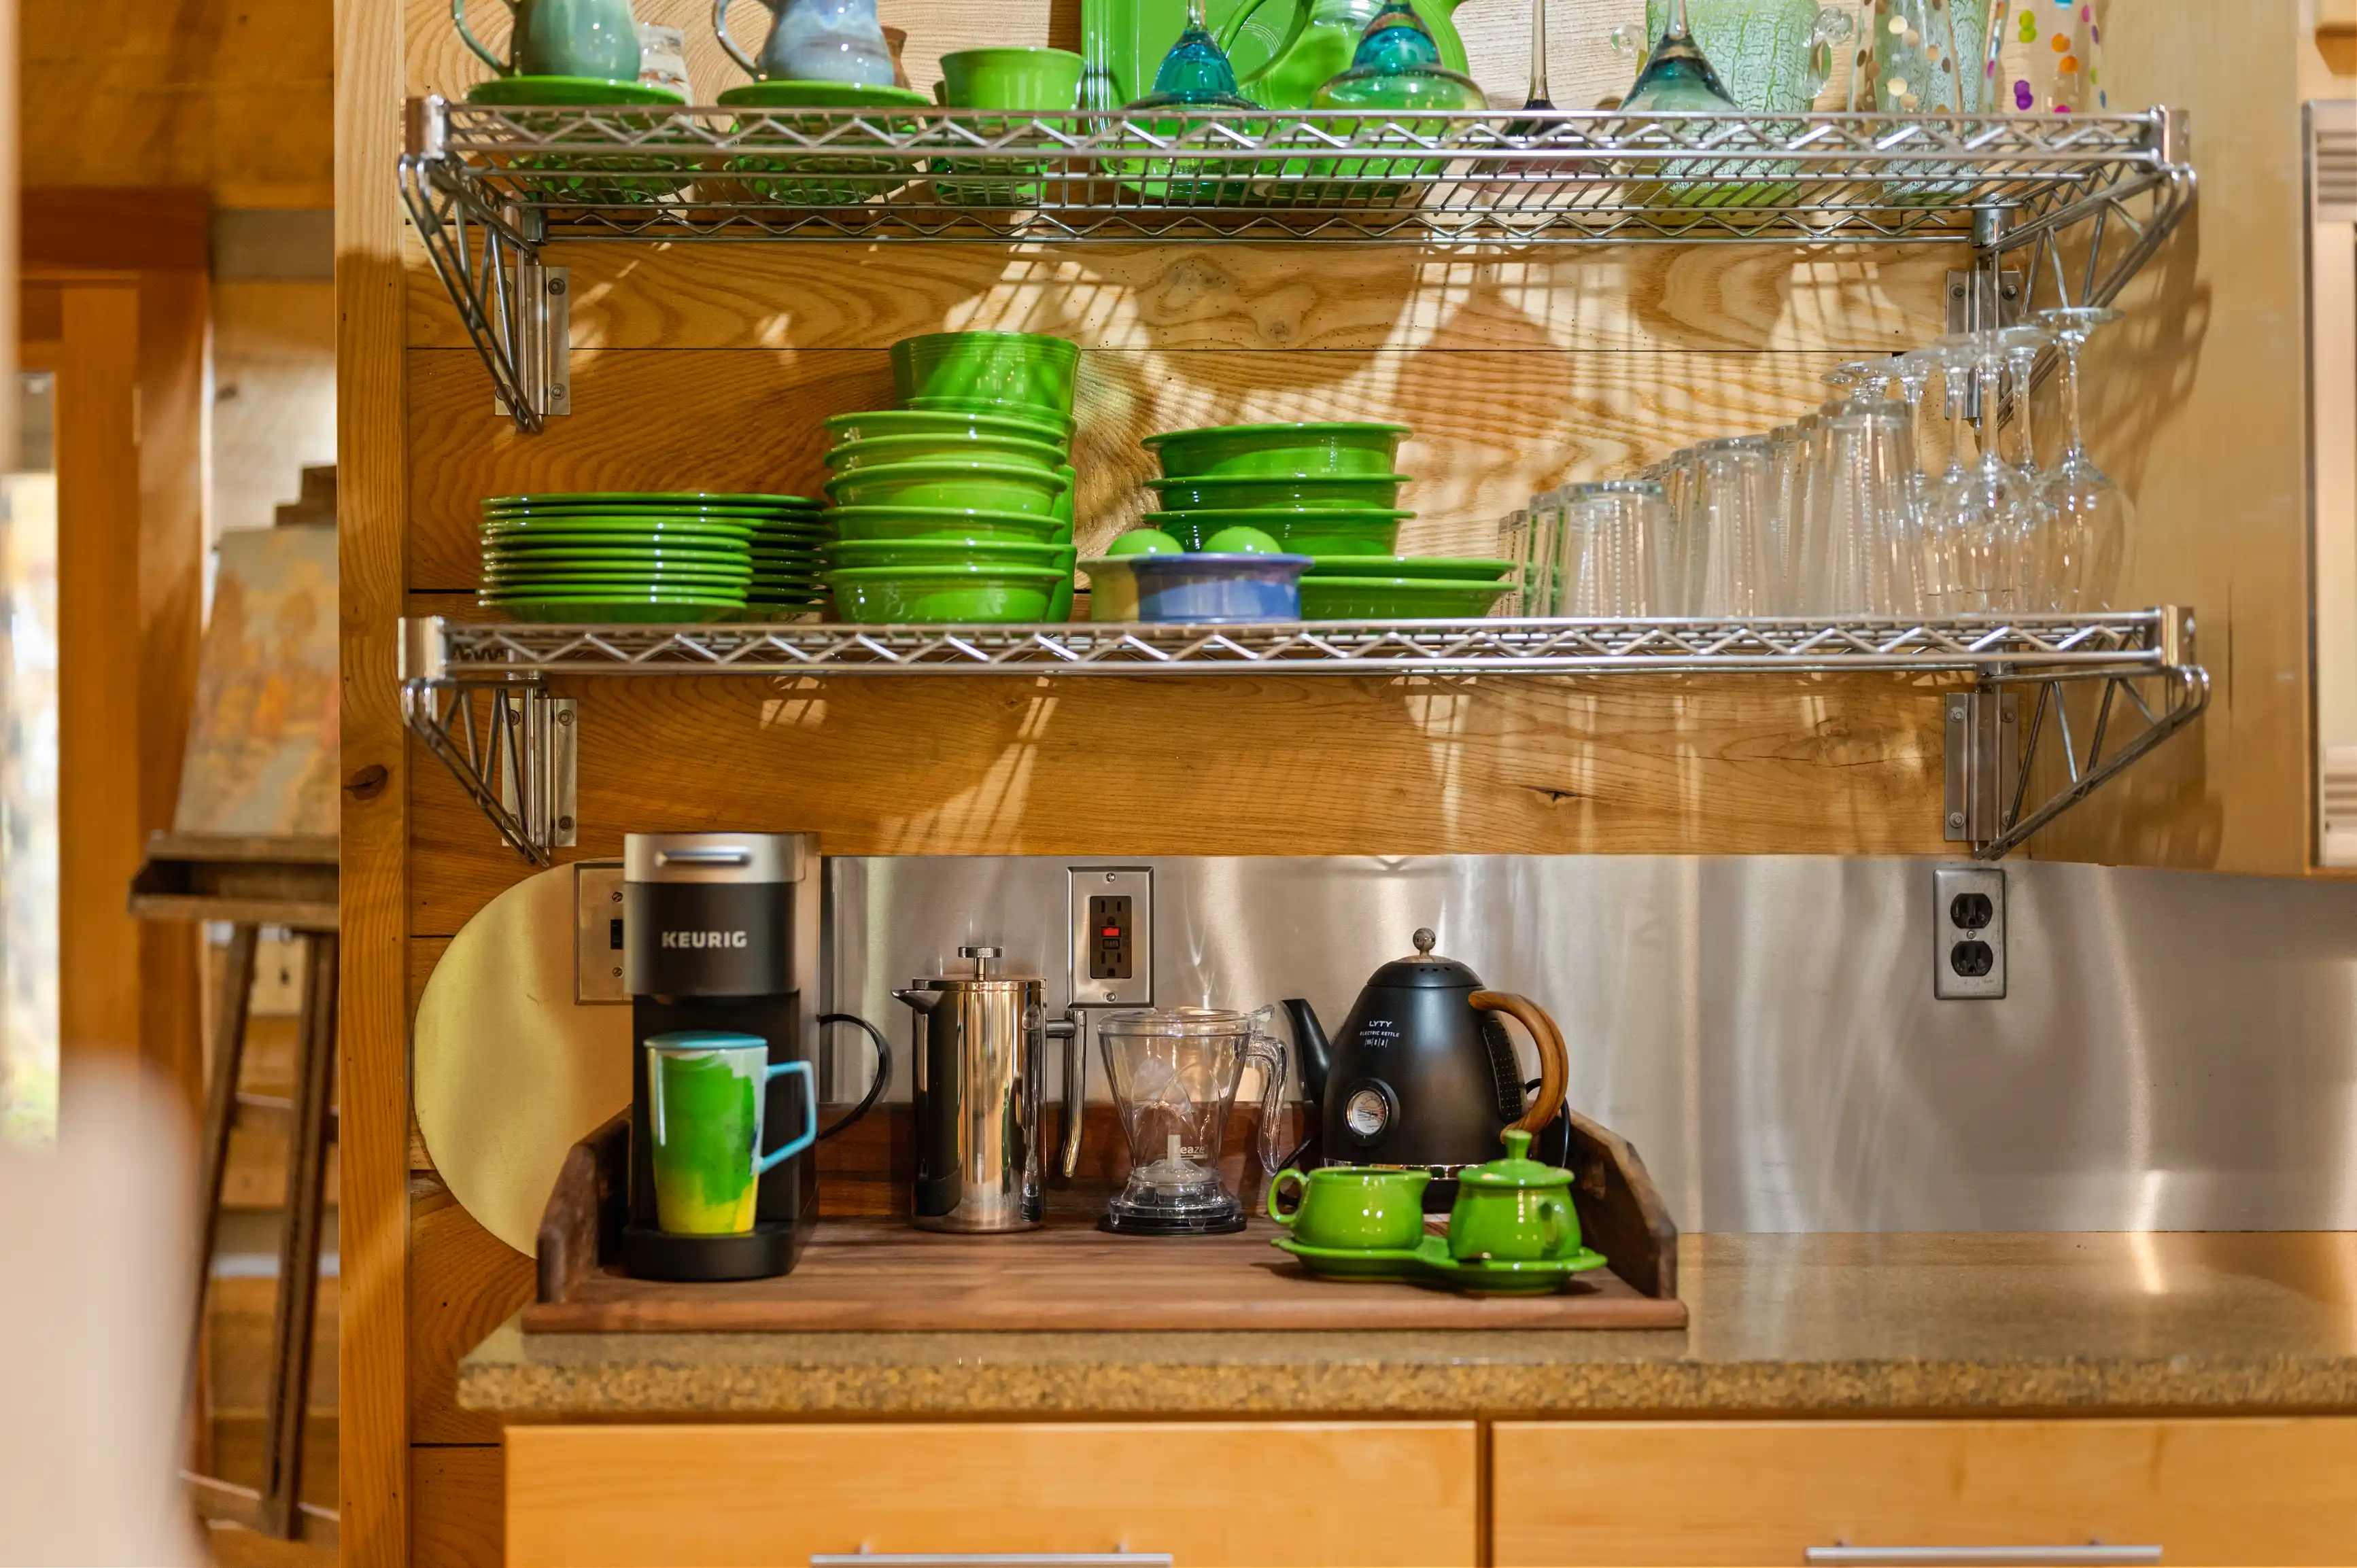 Alt text: A cozy kitchen corner with a wooden counter holding a Keurig coffee maker, French press, and tea pot, with shelves above displaying green plates and glasses.